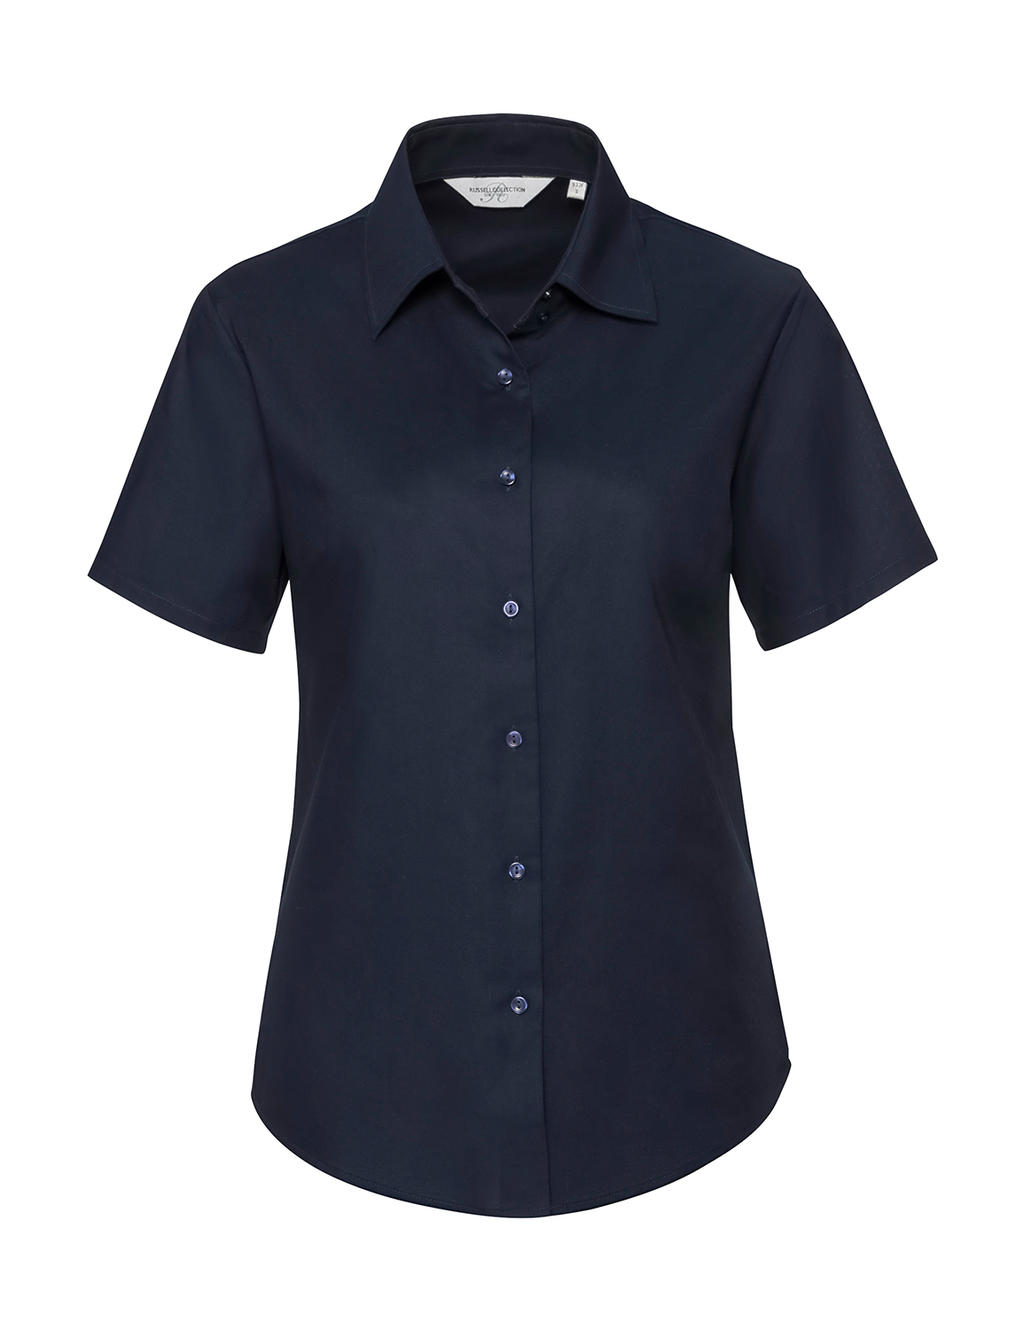  Ladies Classic Oxford Shirt in Farbe Bright Navy